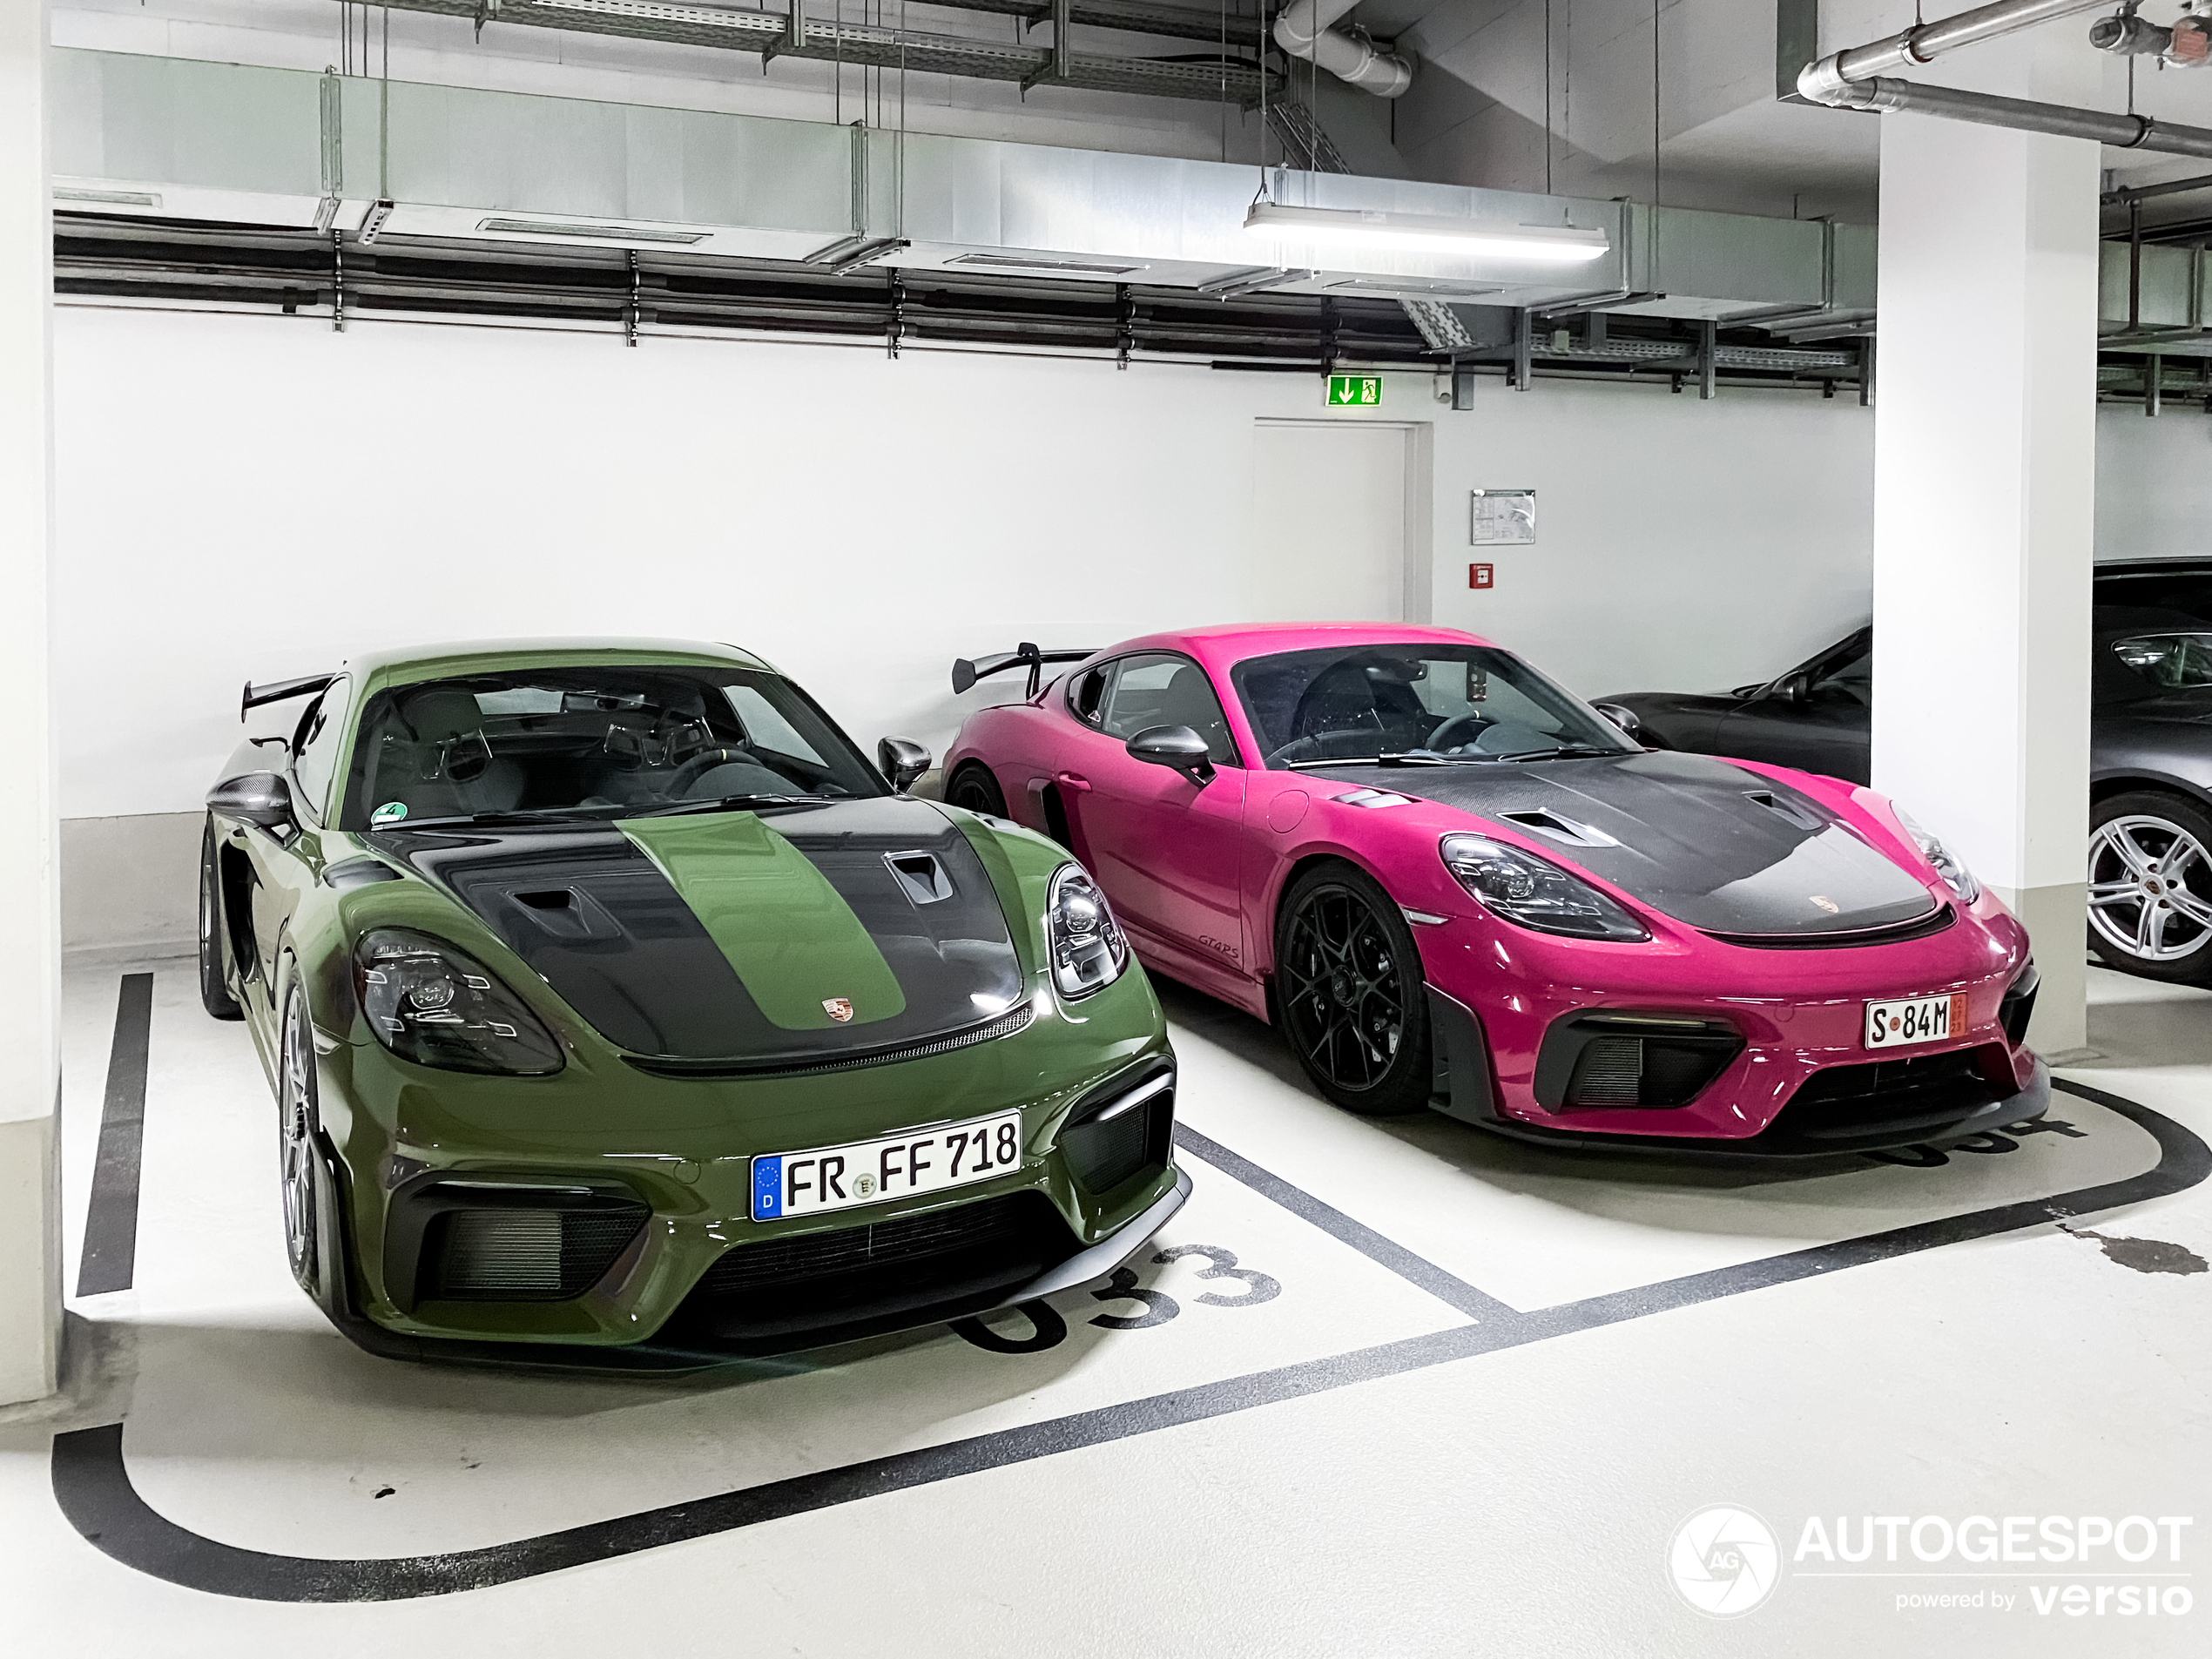 A colorful combo of two GT4RS shows up in the depths of Zuffenhausen